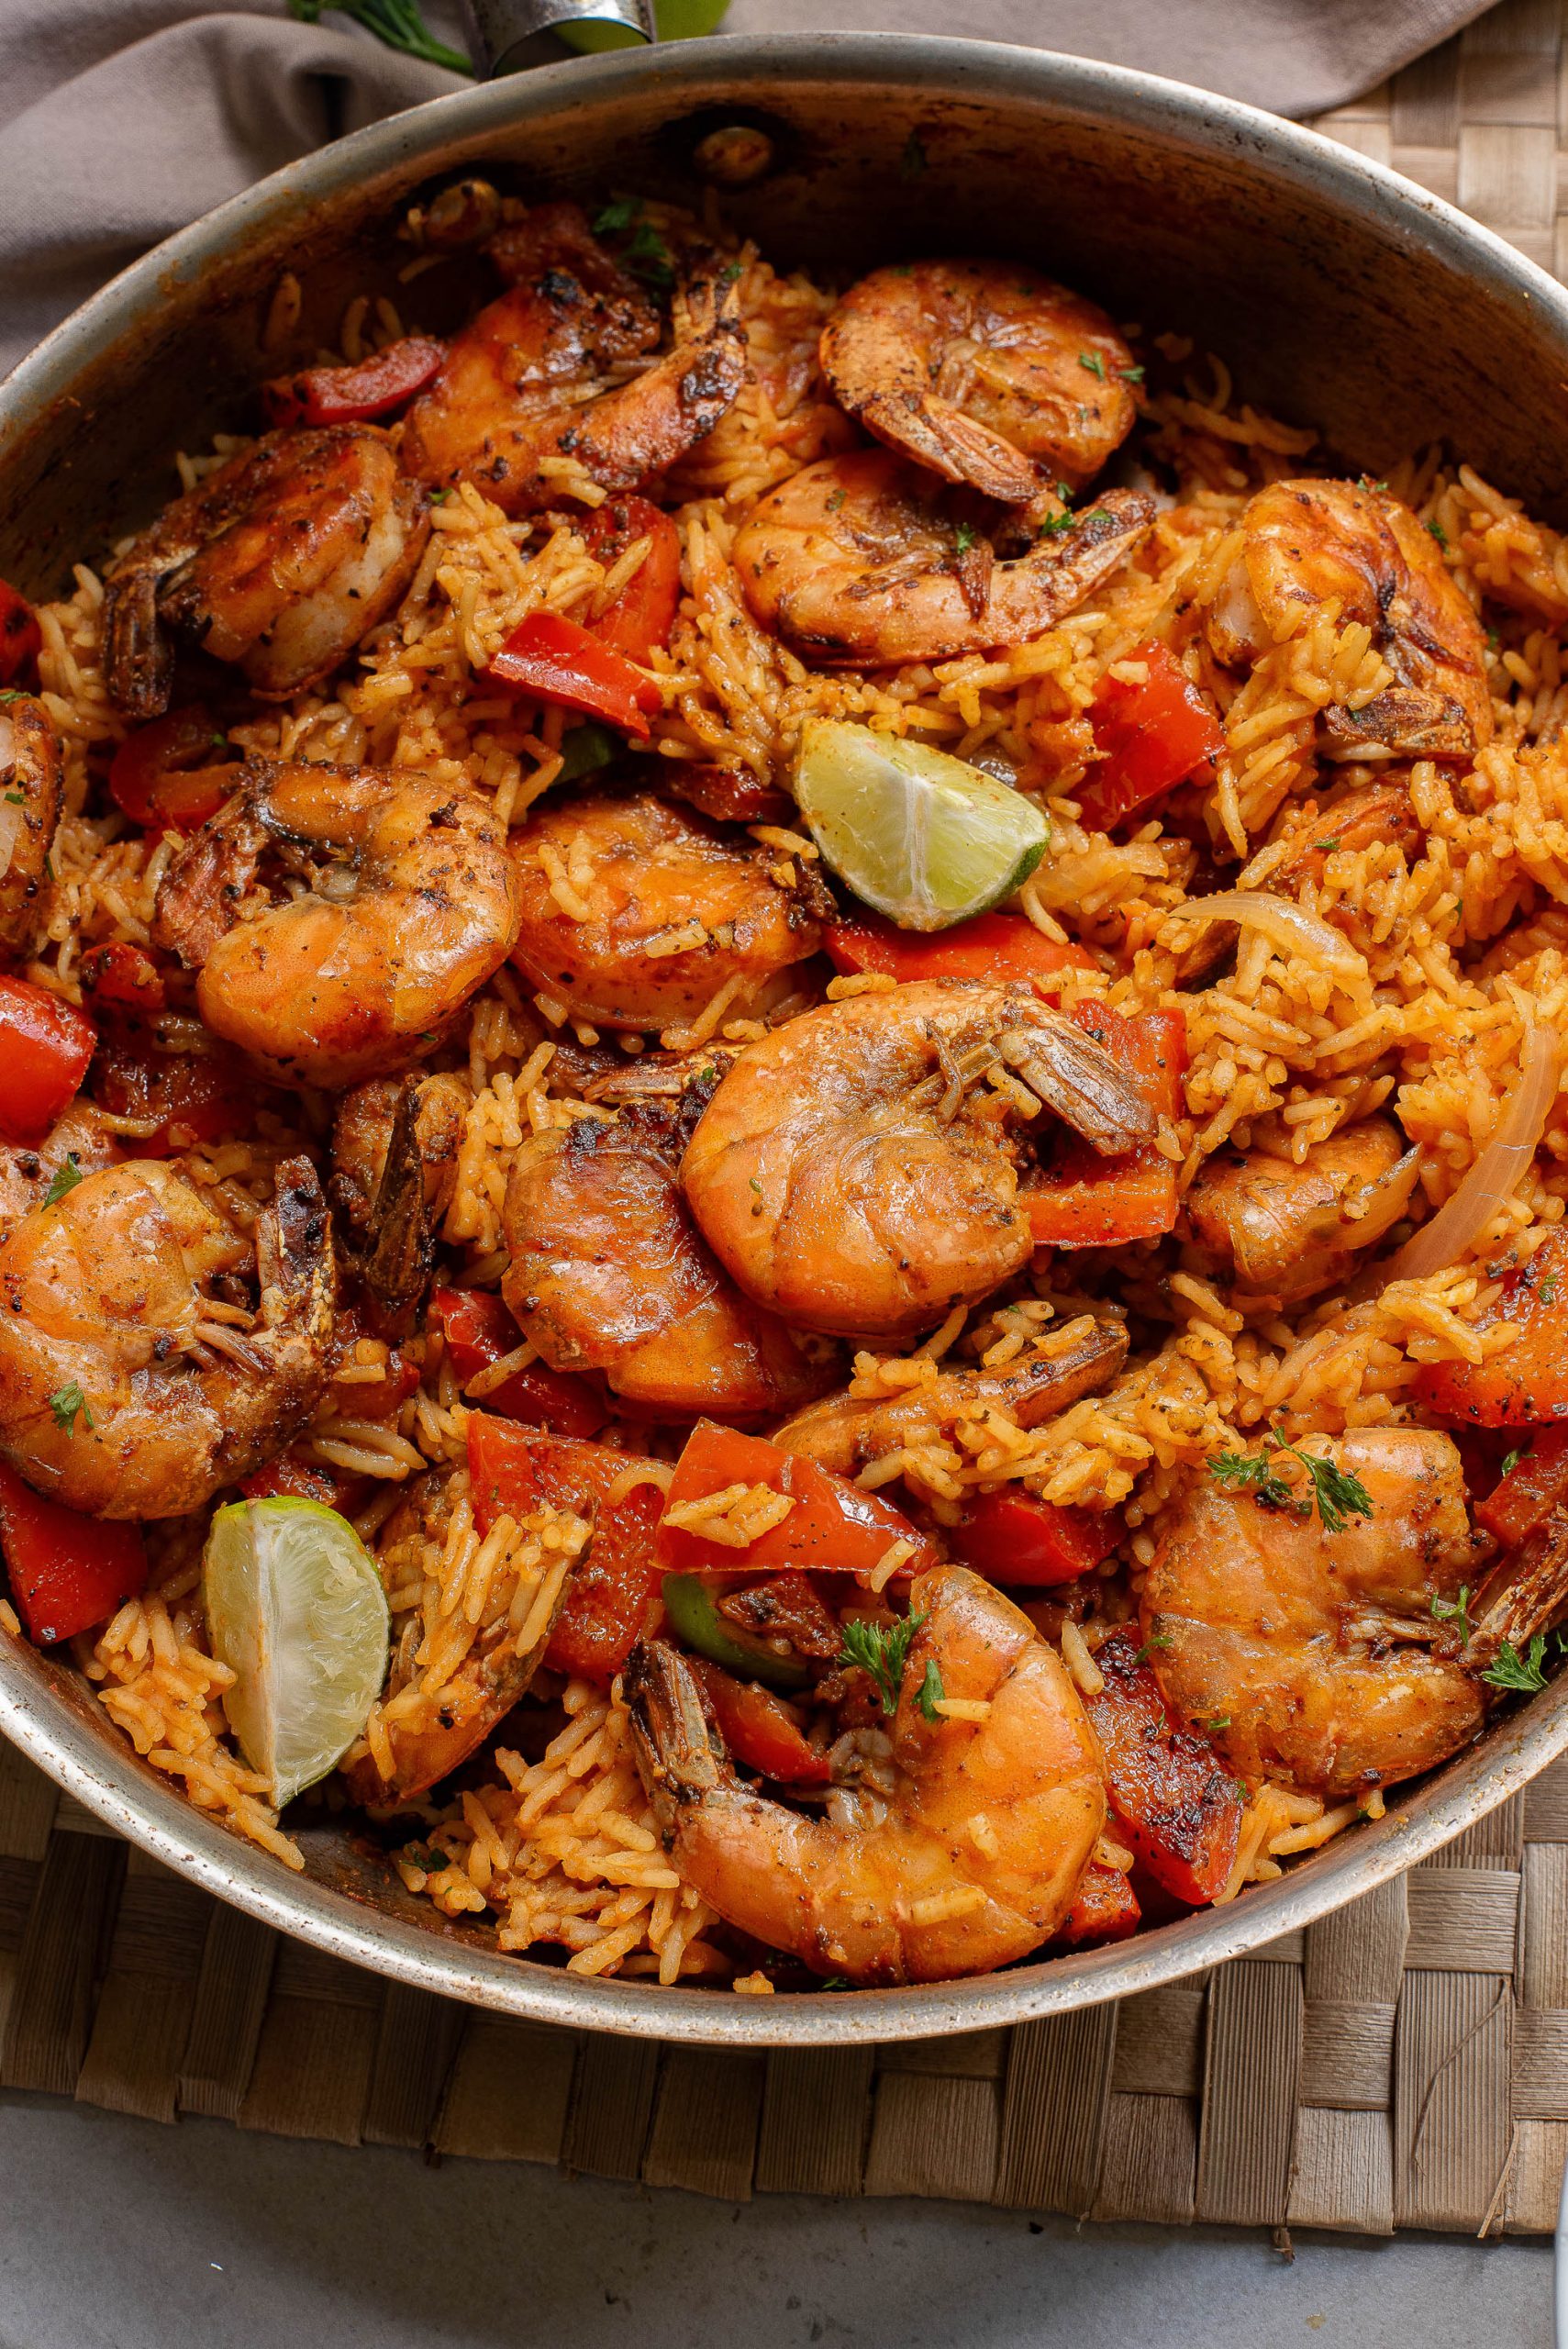 Cajun Seafood Rice Casserole in a pan on a table.